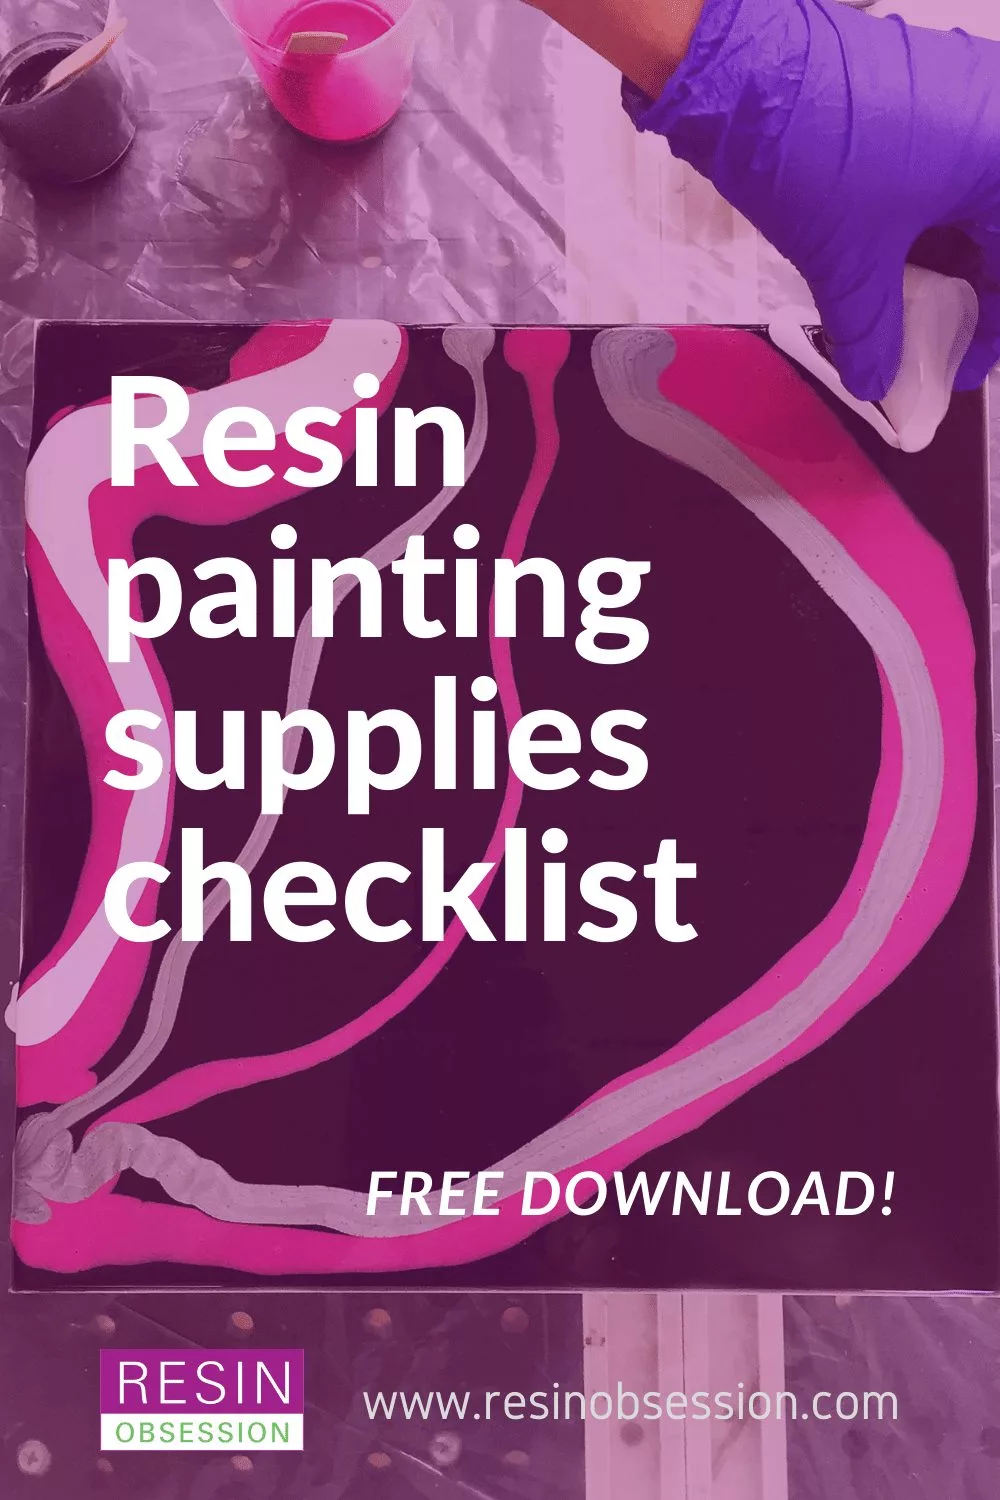 The 10 Items You Need For Epoxy Pouring Art - Resin Obsession